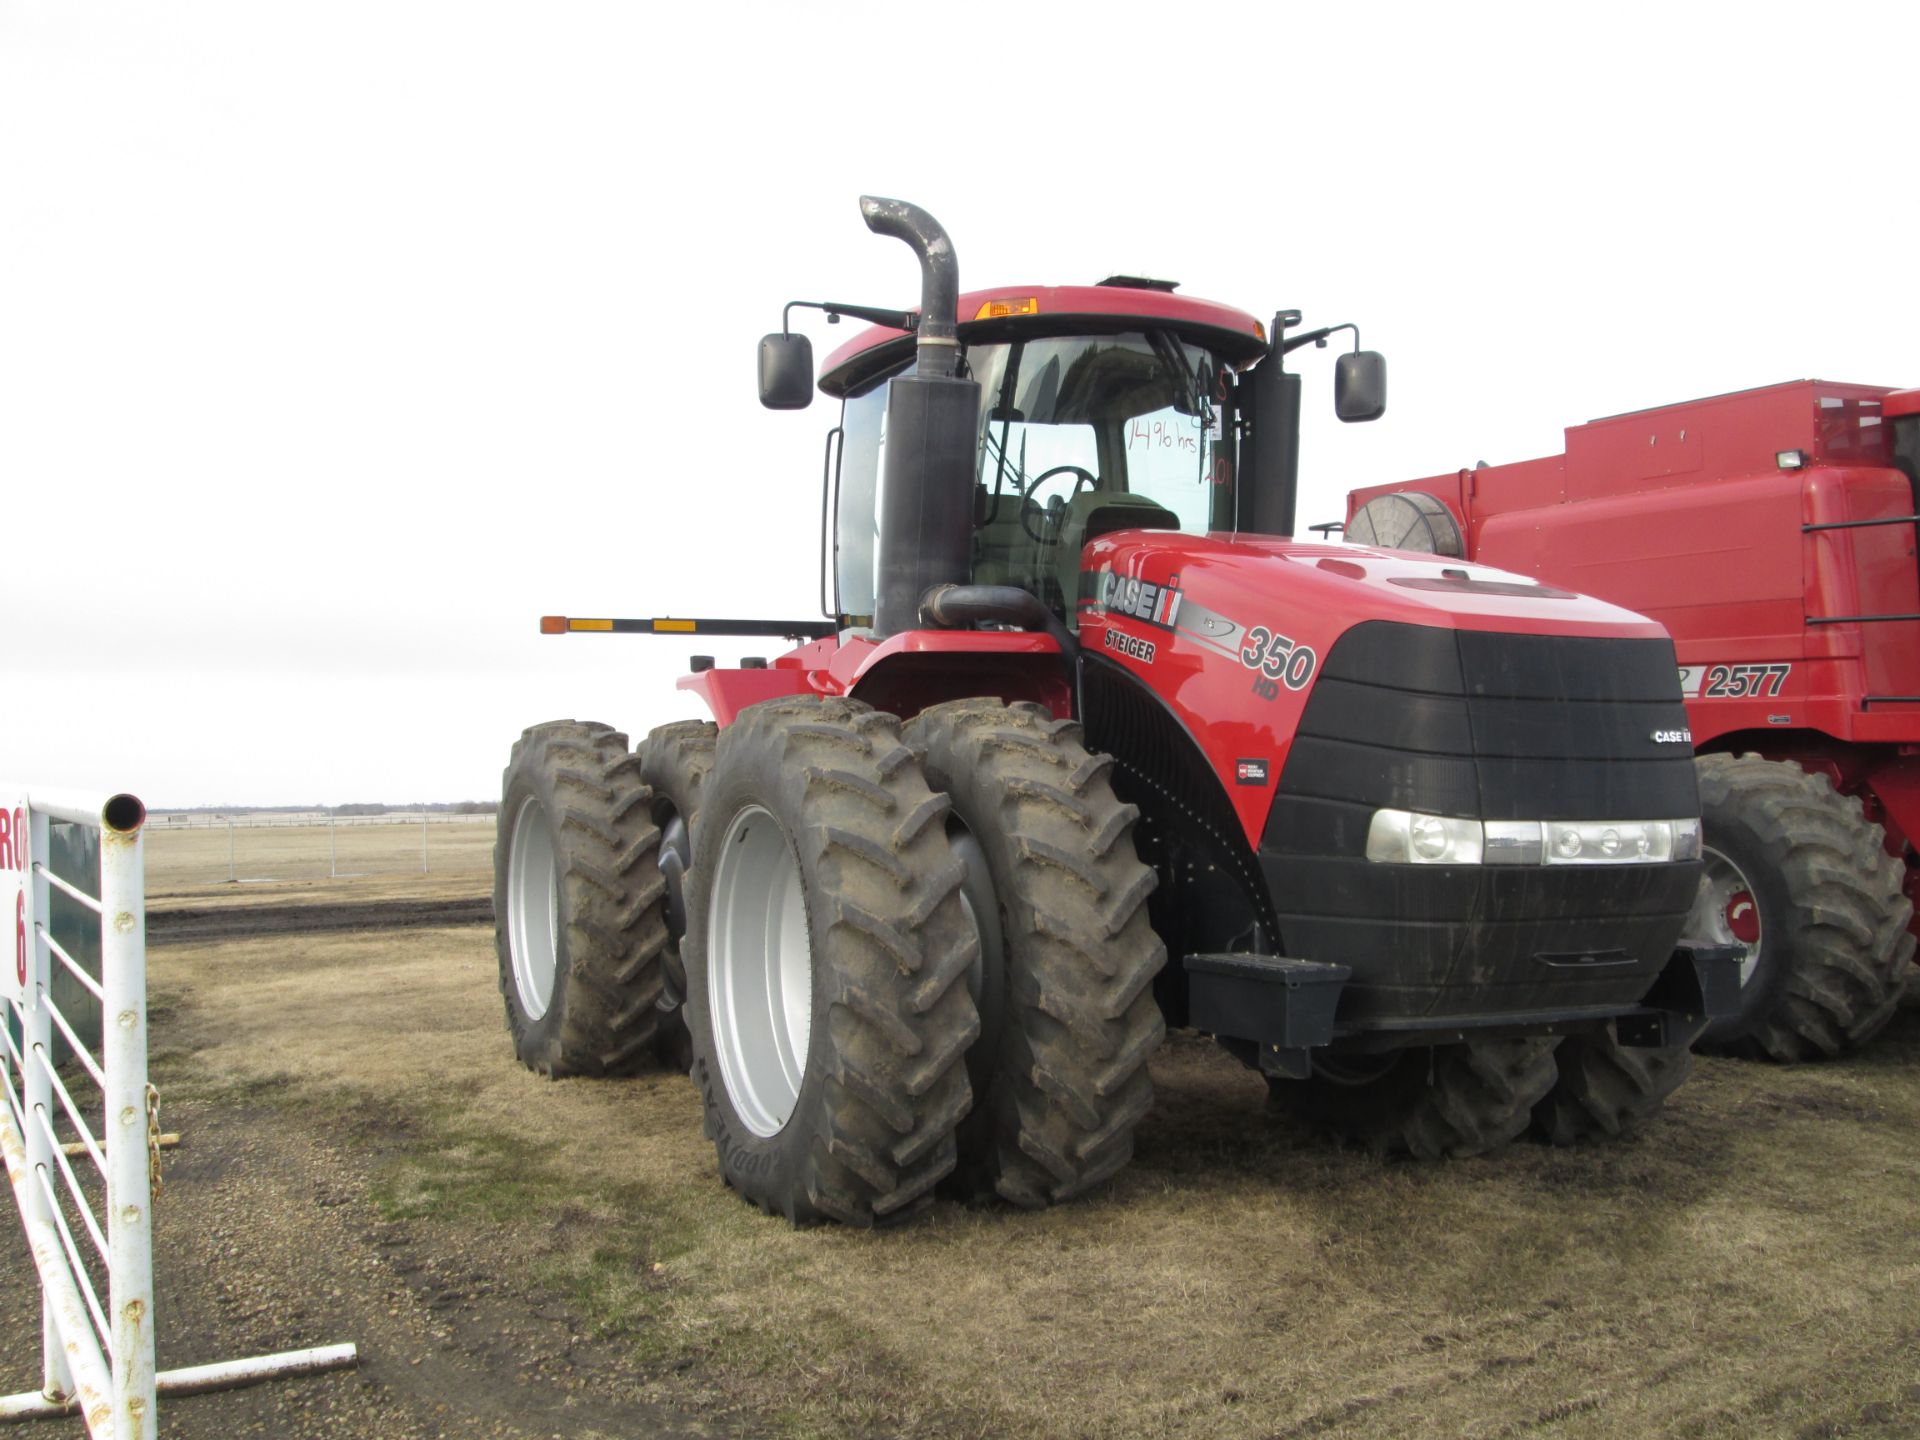 2011 CASE IH Steiger 350 HD 4wd Tractor - Image 7 of 11